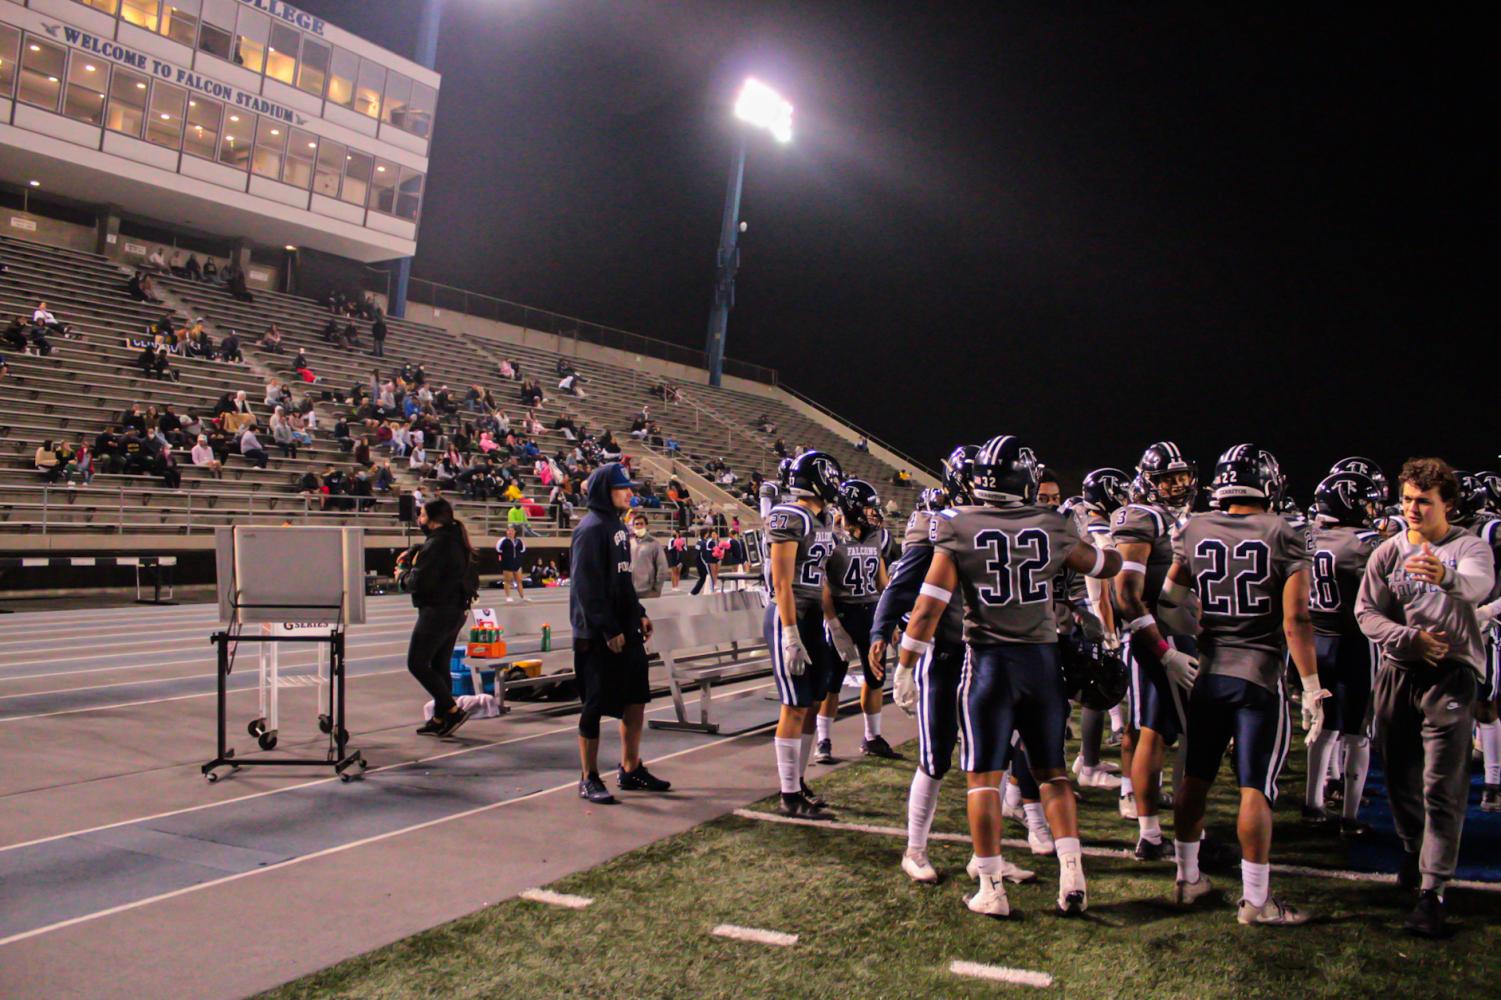 The Cerritos sideline as the defense rest after coming off the field late in the fourth quarter. The team can be seen excited to see their offense attempt a comeback down by five points on Oct. 30, 2021. Photo by: Roman Acosta